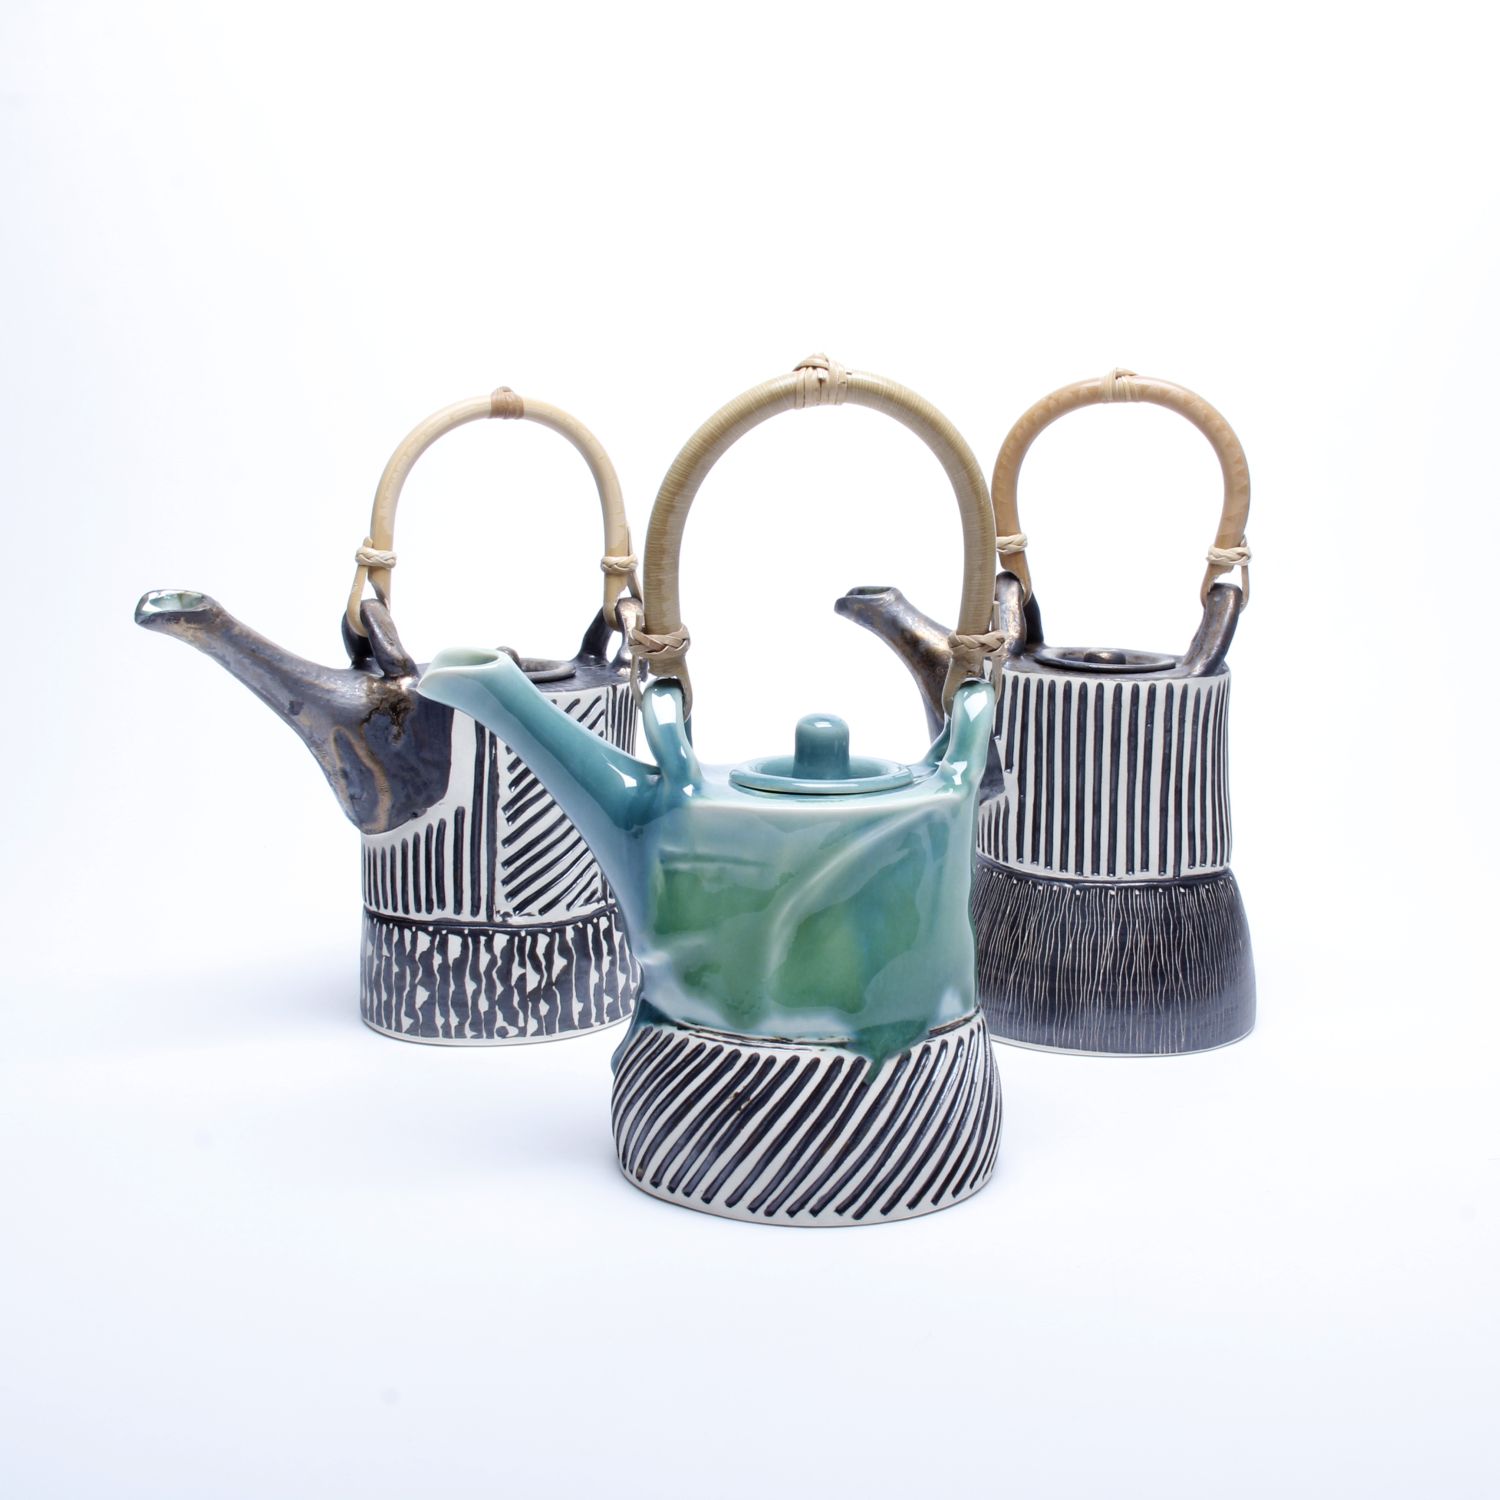 Jane Wilson: Teapot (Each sold separately) Product Image 1 of 4